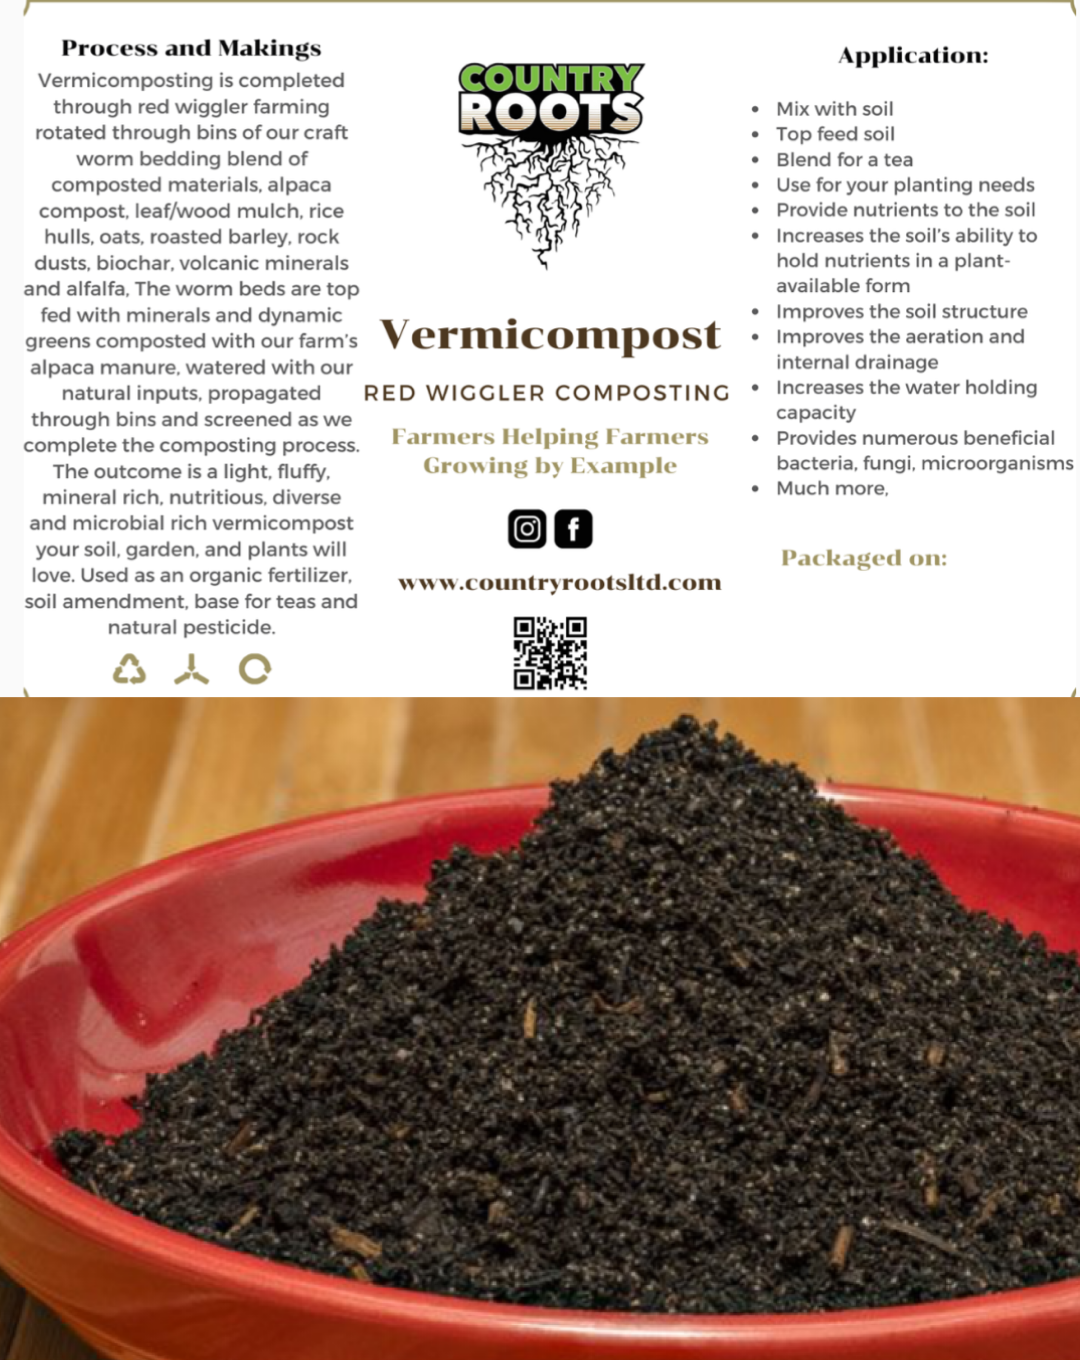 Vermicompost/Worm Castings - Country Roots